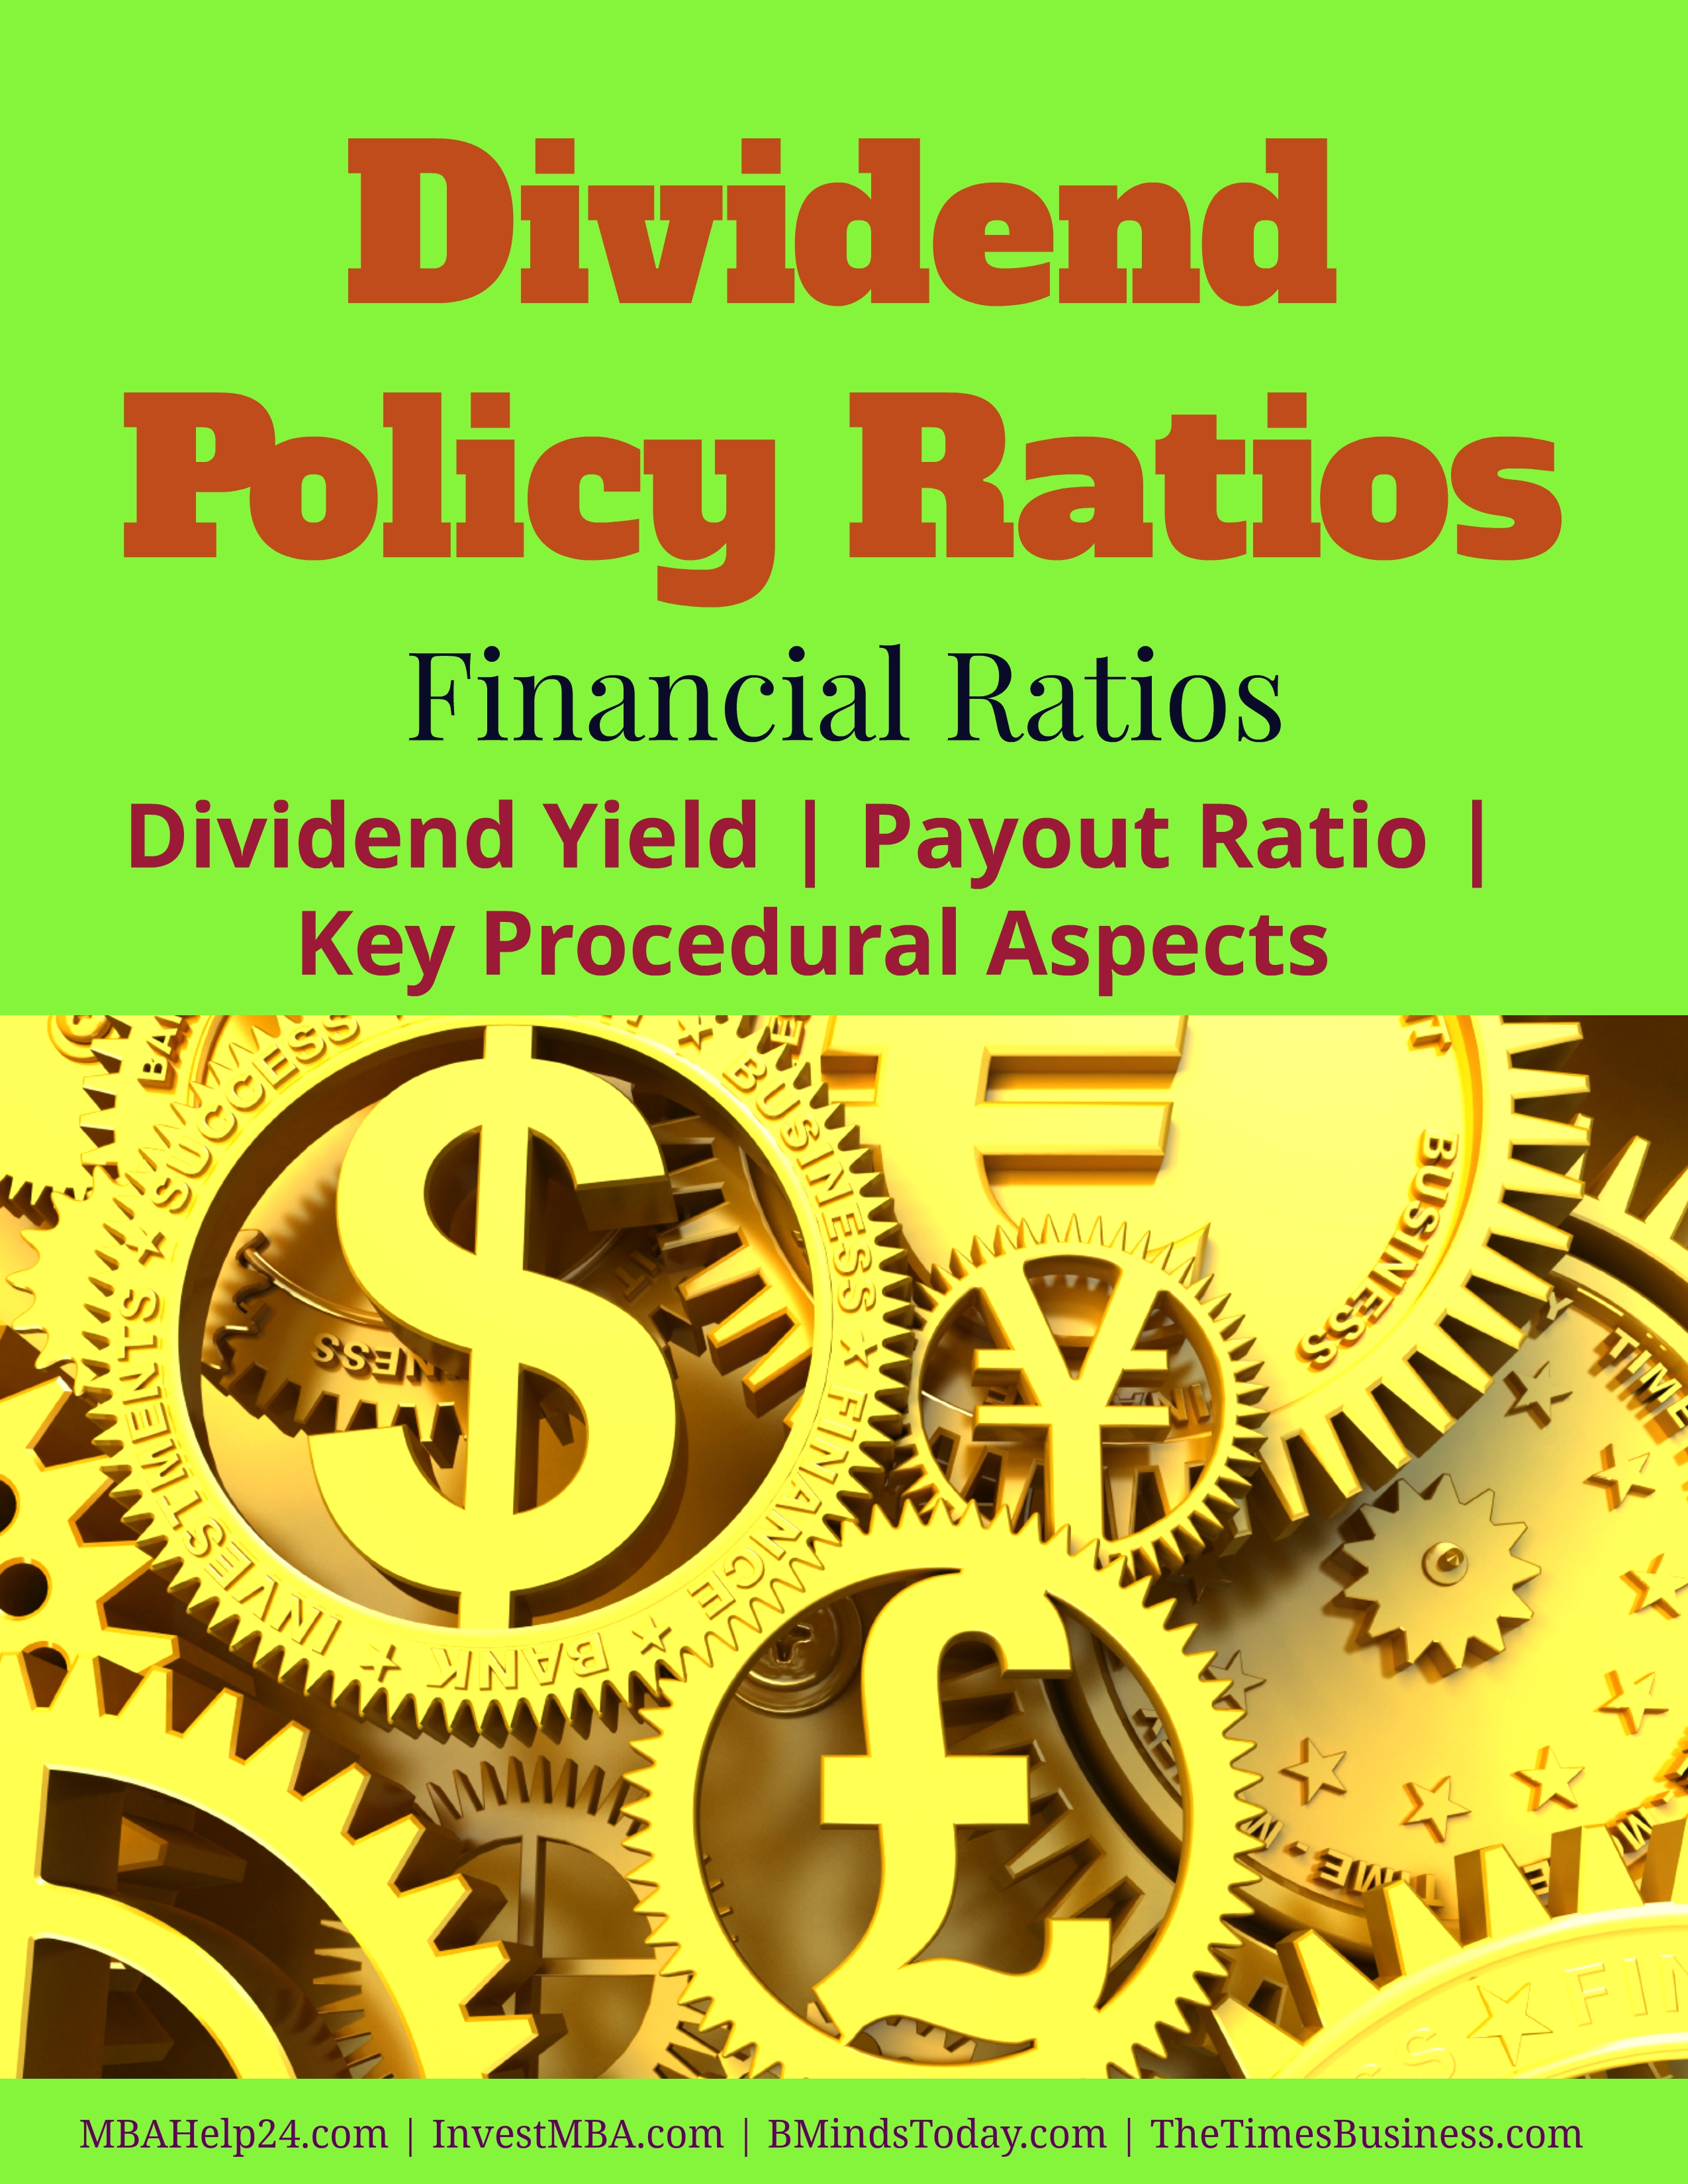 Dividend Policy Ratios- Dividend Yield, Payout Ratio, Key Procedural Aspects Dividend Policy Ratios Dividend Policy Ratios | Dividend Yield | Payout Ratio | Key Procedural Aspects Dividend Policy Ratios Dividend Yield Payout Ratio Key Procedural Aspects Dividend Policy Ratios | Dividend Yield | Payout Ratio Dividend Policy Ratios | Dividend Yield | Payout Ratio Dividend Policy Ratios Dividend Yield Payout Ratio Key Procedural Aspects